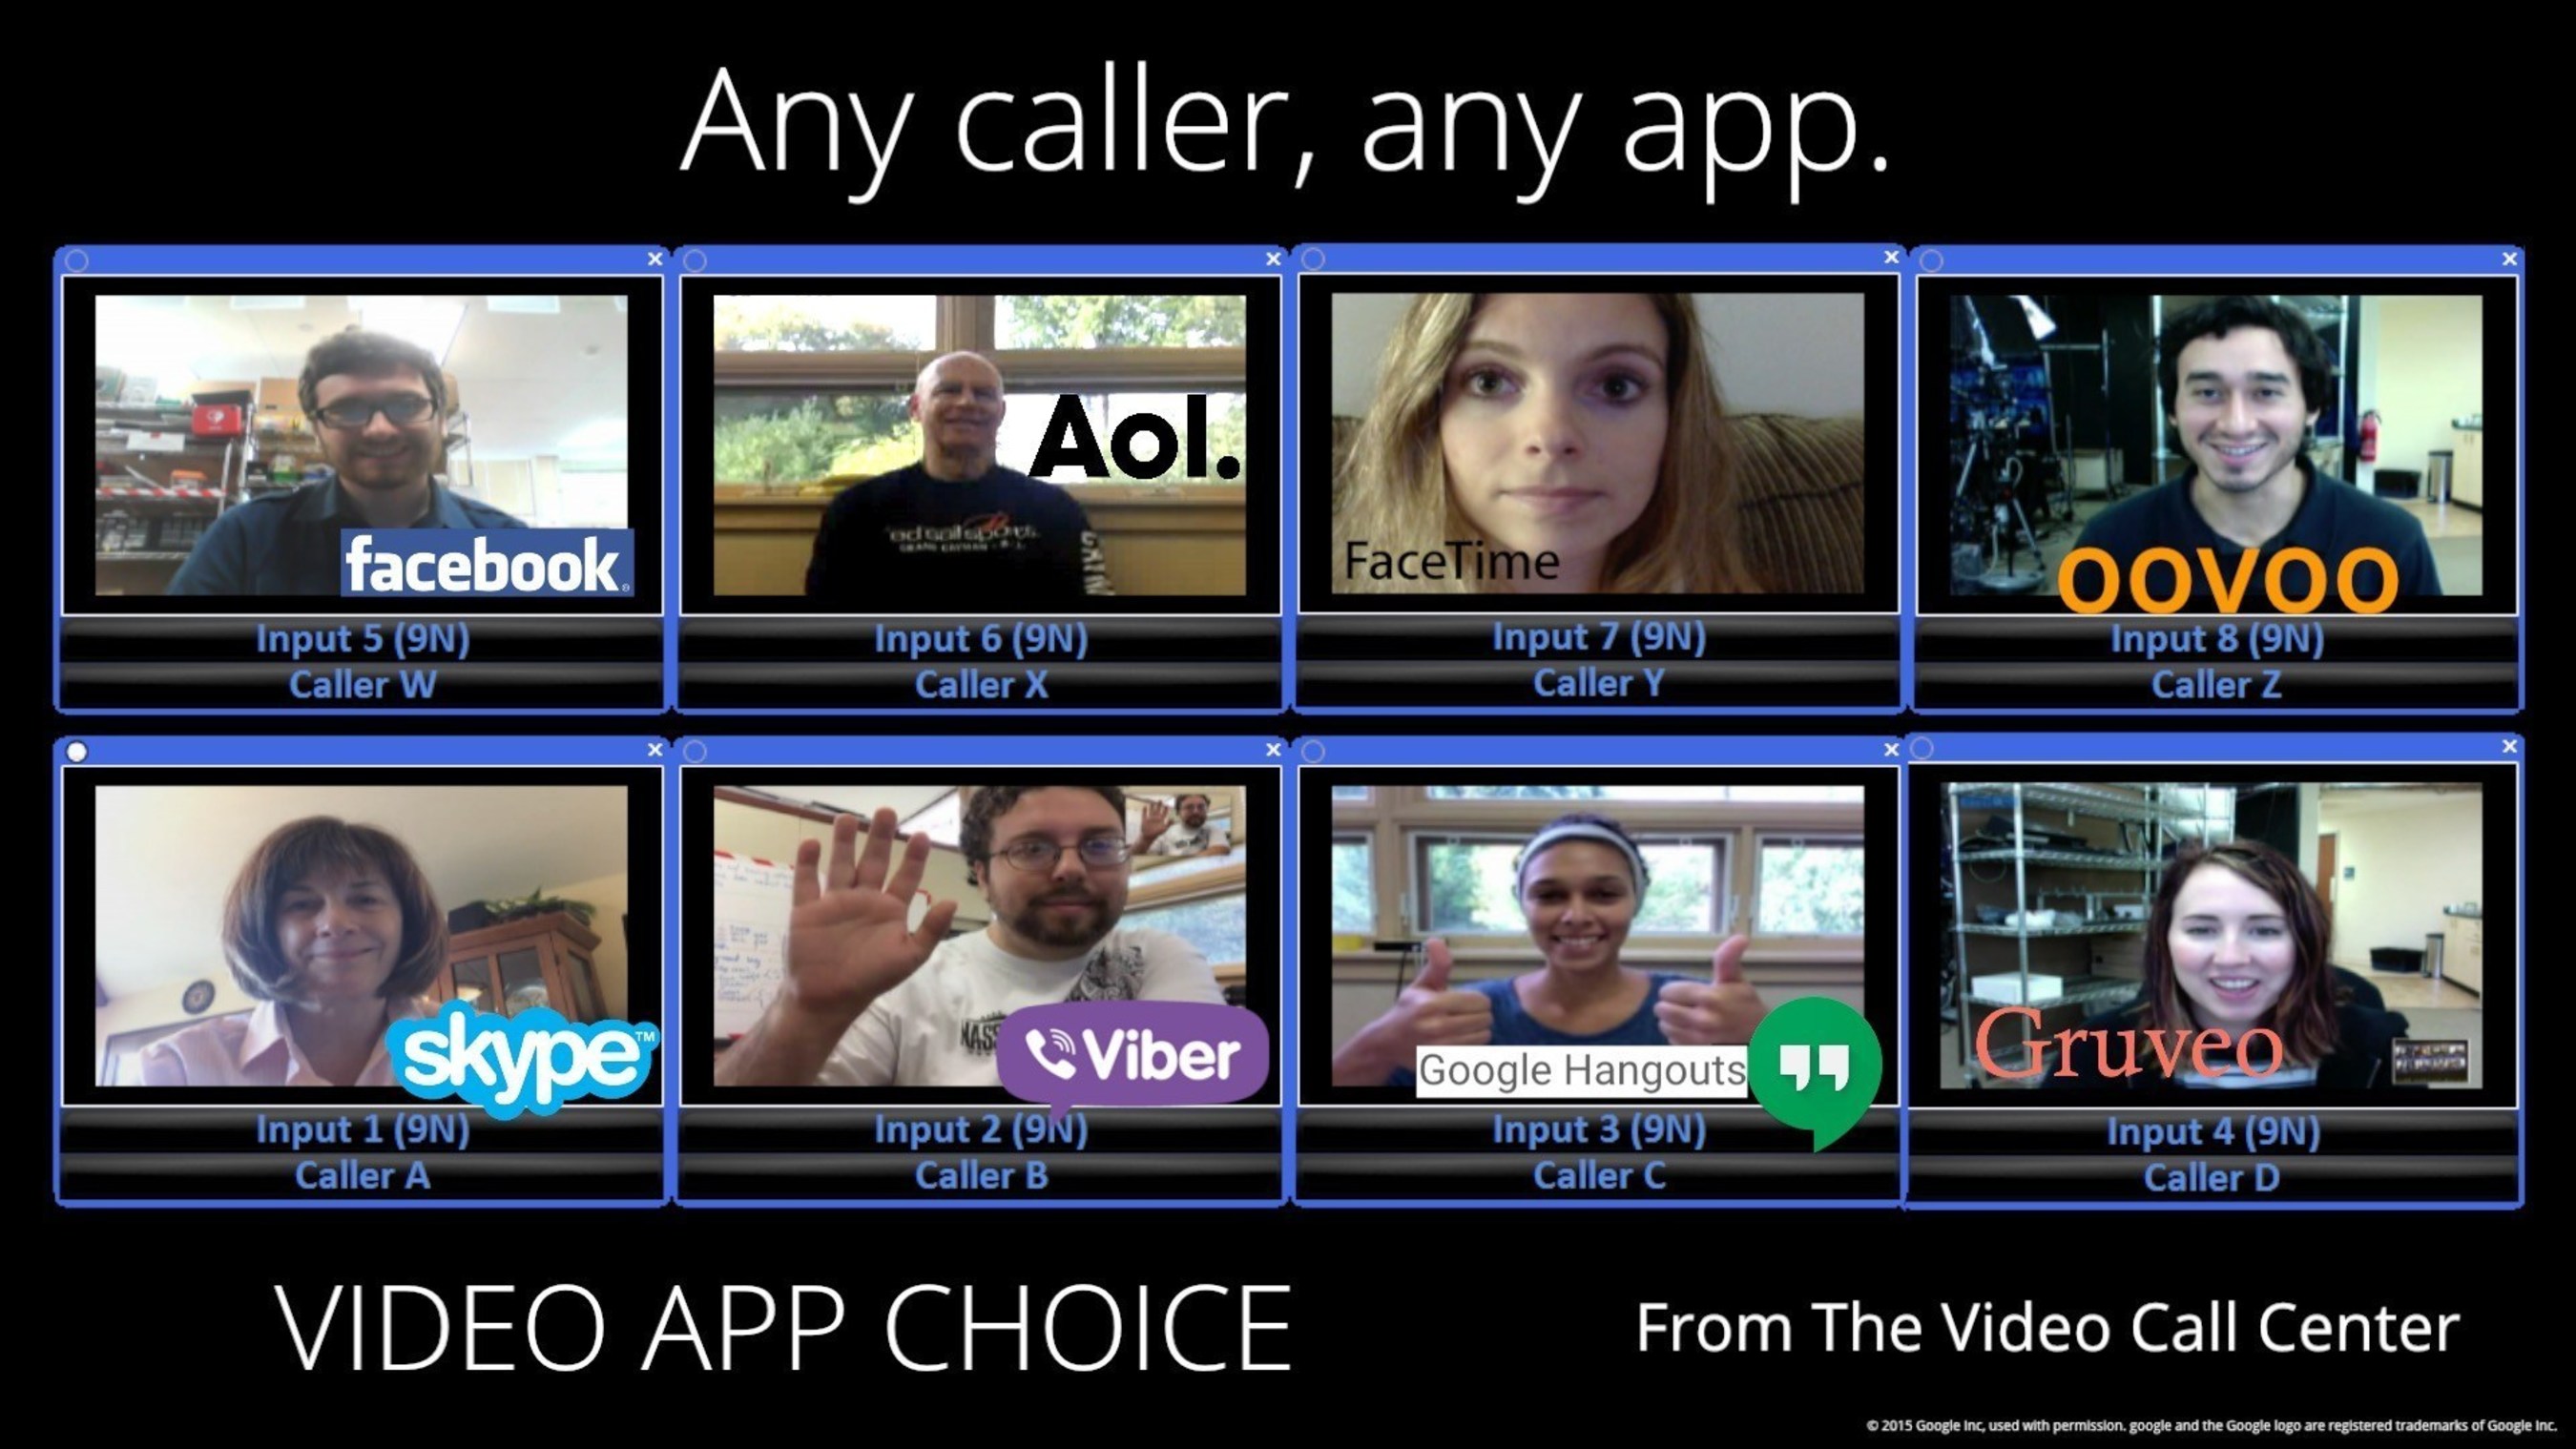 Video App Choice Connectivity Demonstration: Eight Video Call Center staffers simultaneously connect to the VCC Caller Acquisition Technology using eight different IP video applications running on a combination of MACs and PCs. The IP Video applications are FaceTime, Skype, Google, AOL, Viber, Gruveo, ooVoo, and Facebook.